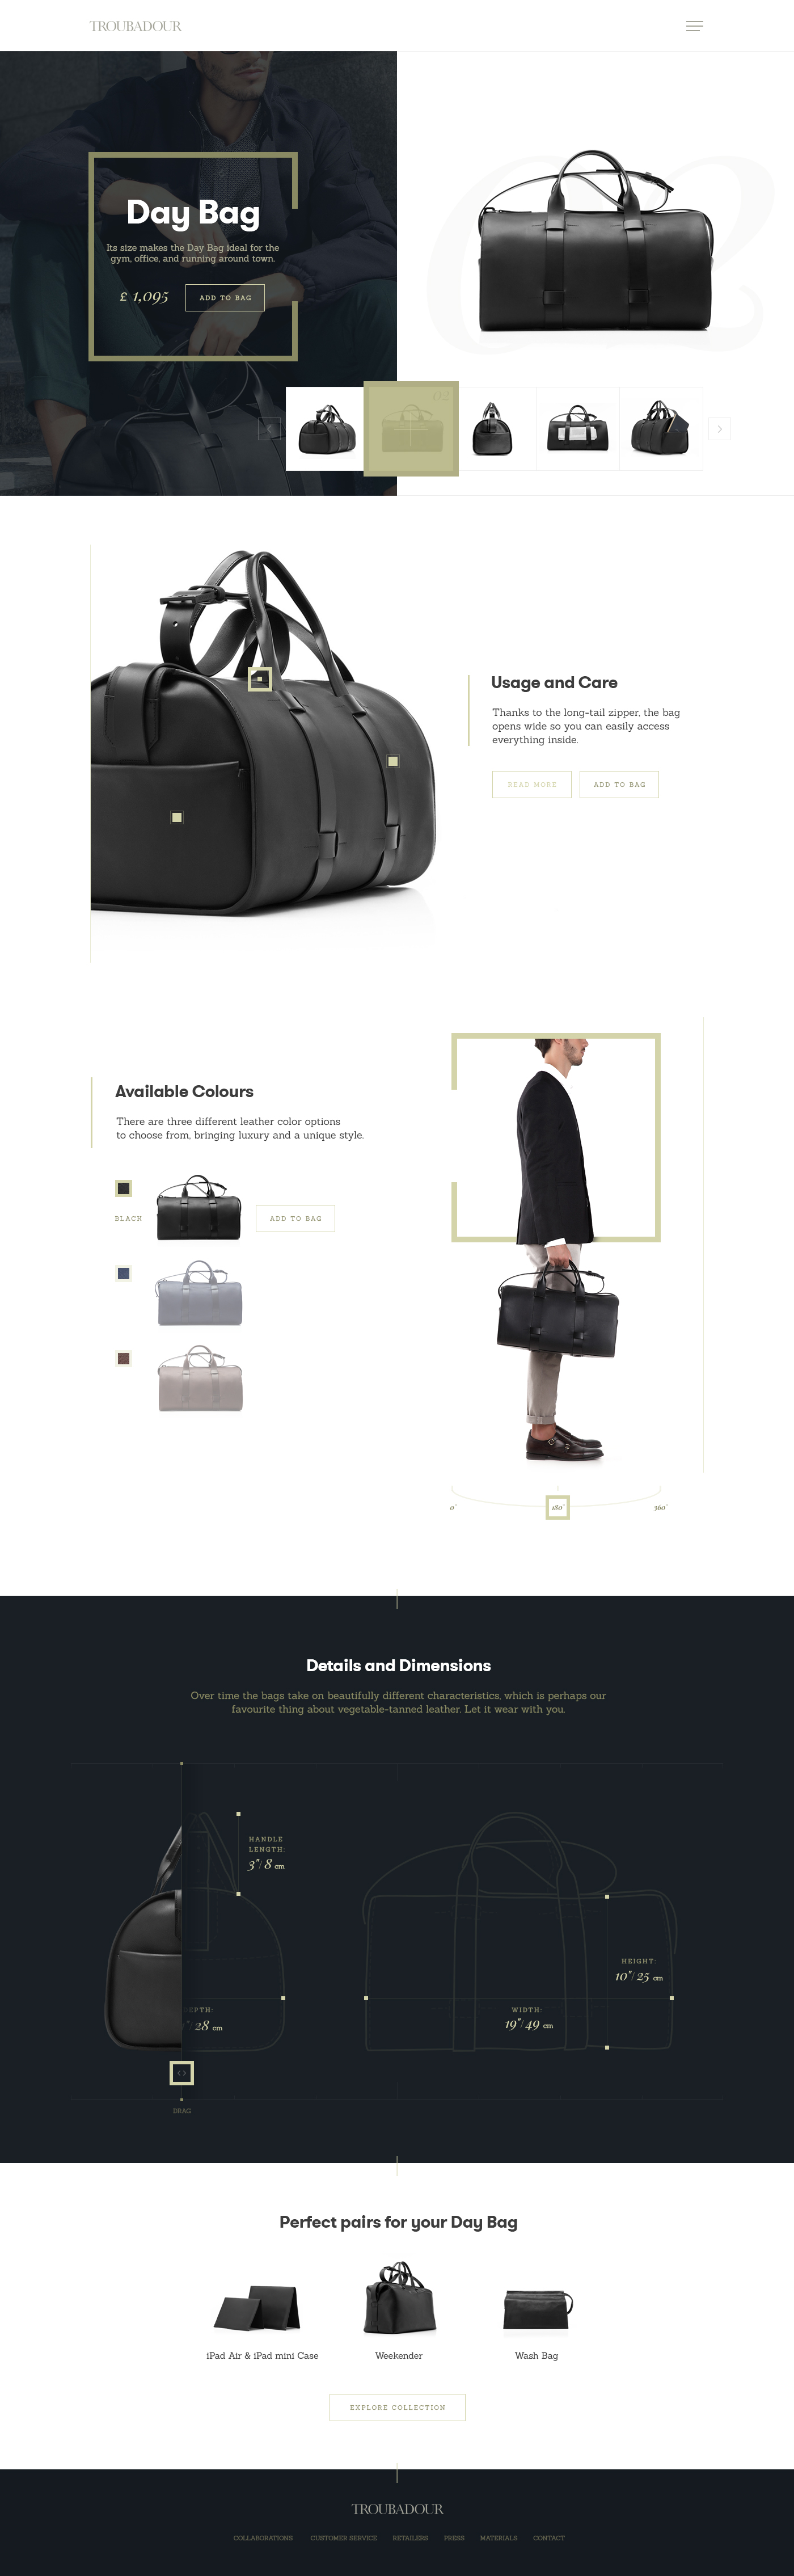 troubadour-product-page